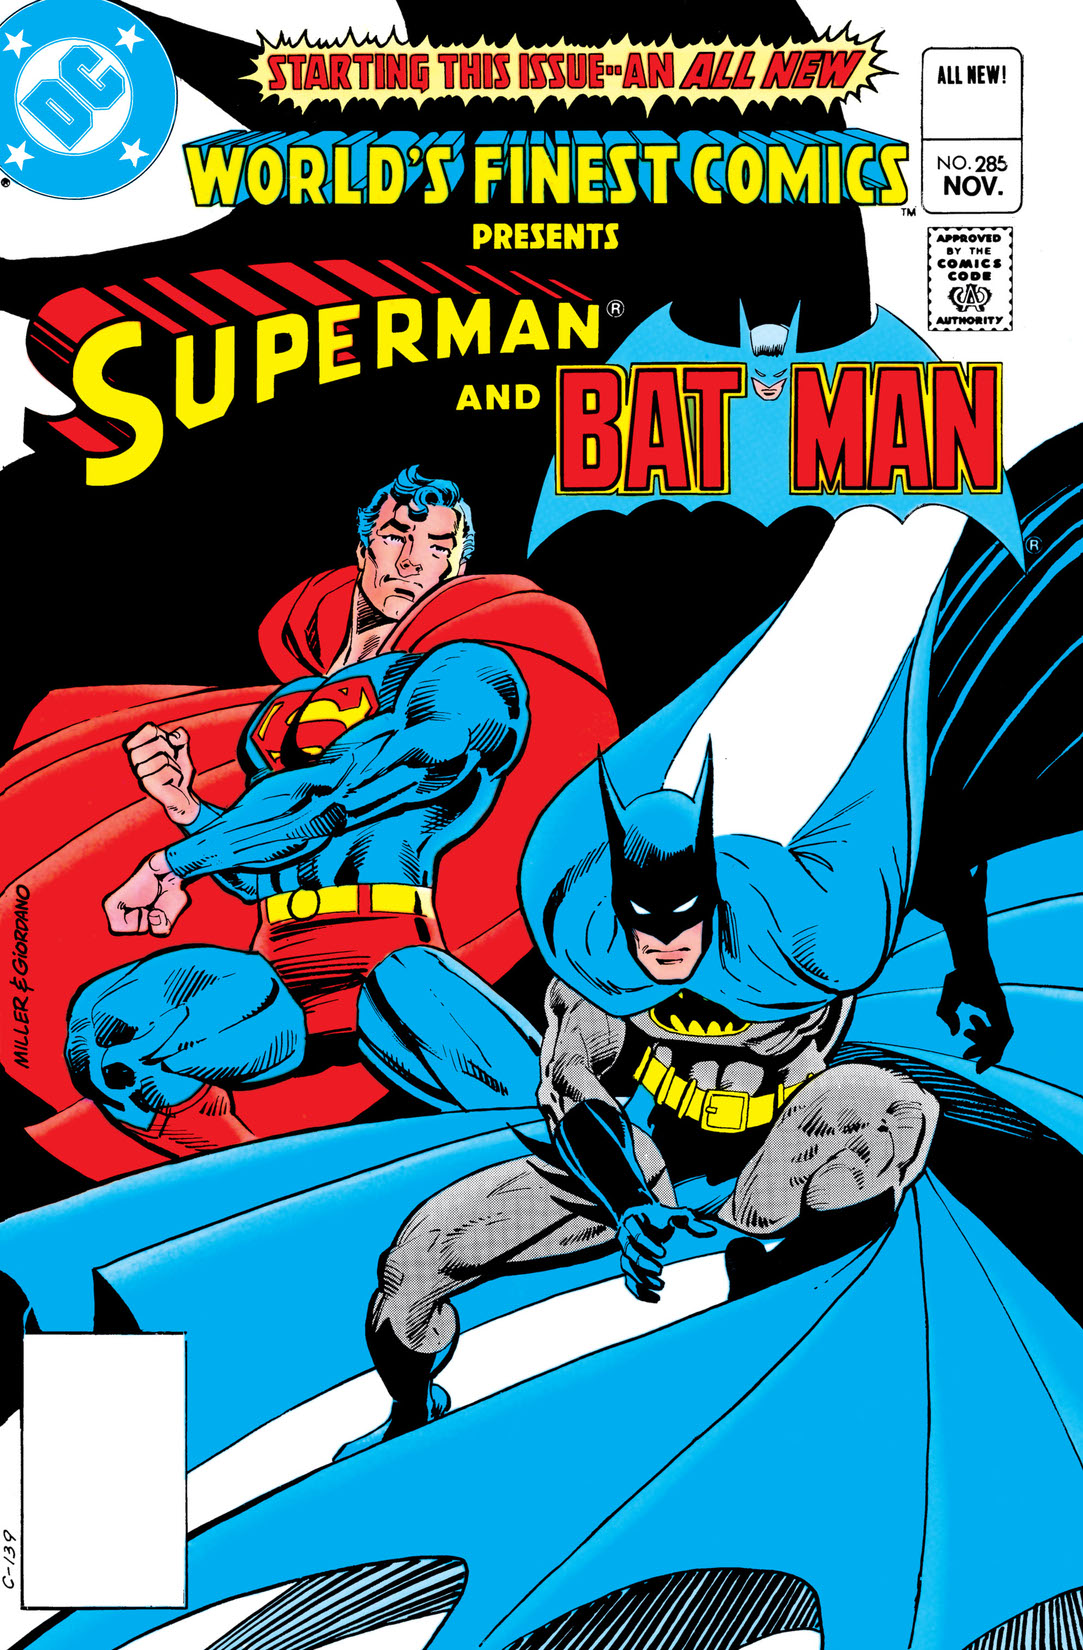 World's Finest Comics (1941-) #285 preview images